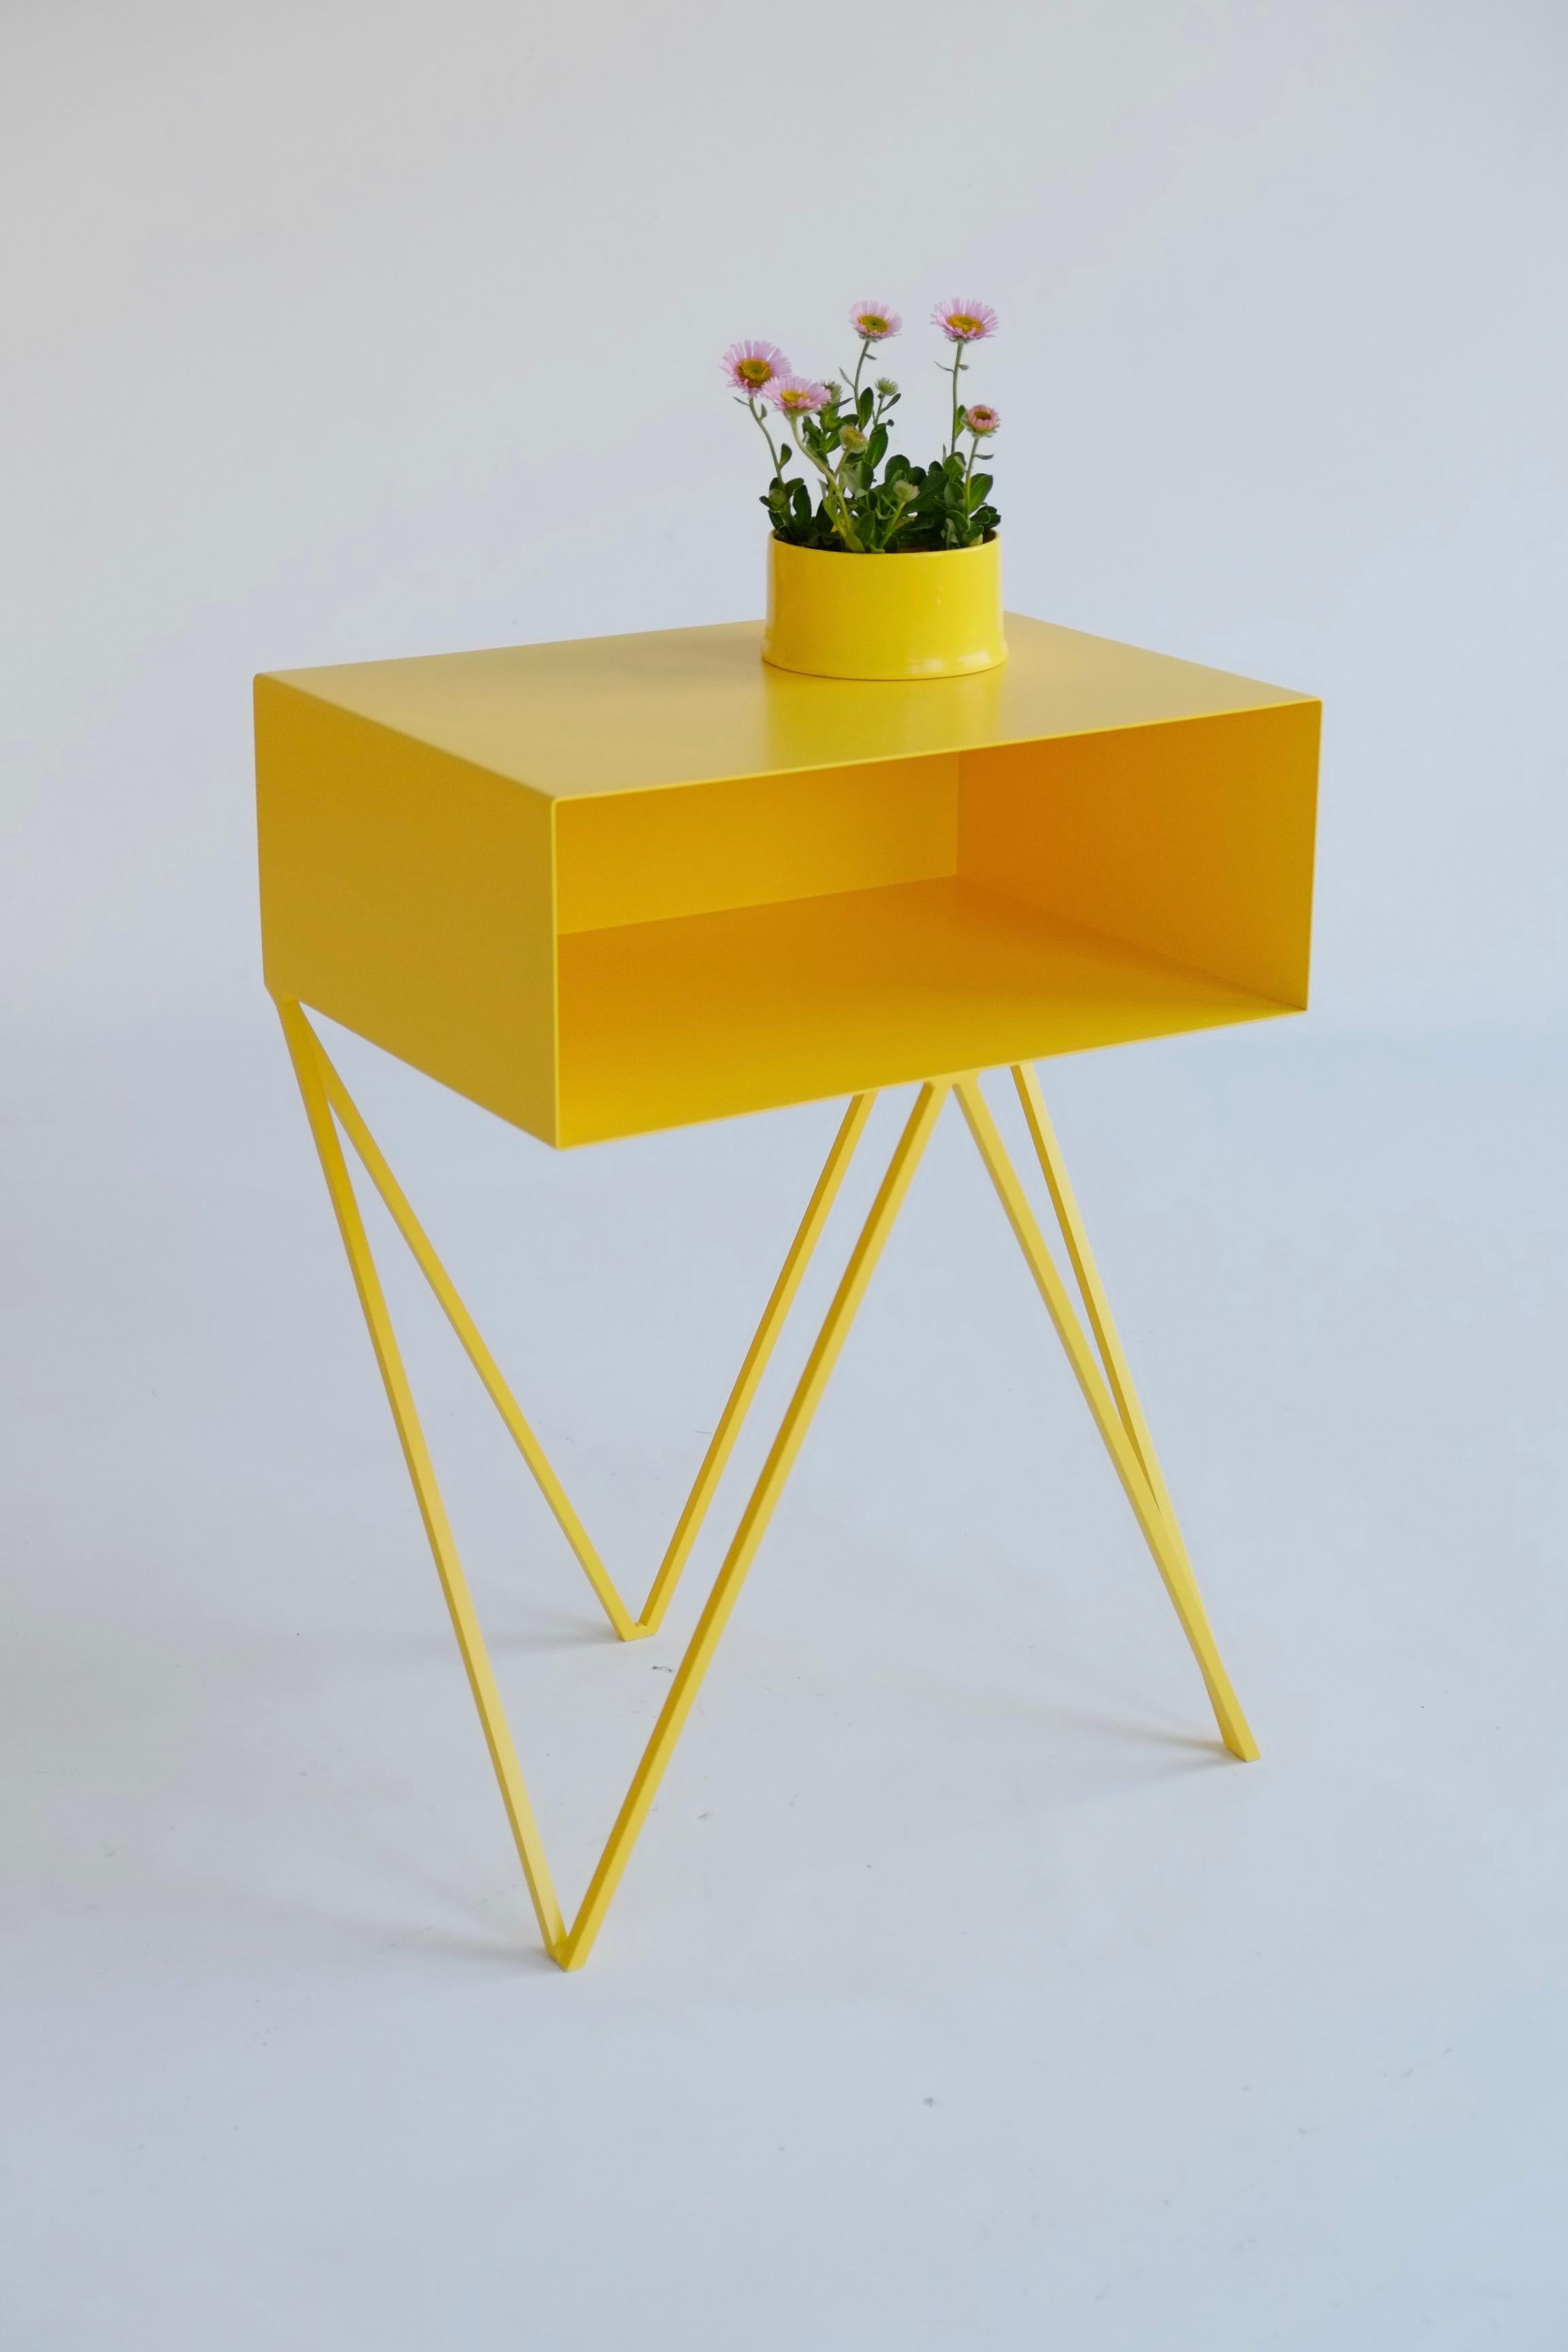 Our all-time best-seller the Robot side table features an open shelf on zig zag legs. A fun and functional design made of solid steel, powder-coated in yellow. The clean lines look great against period details as well as in modern spaces. Perfect as